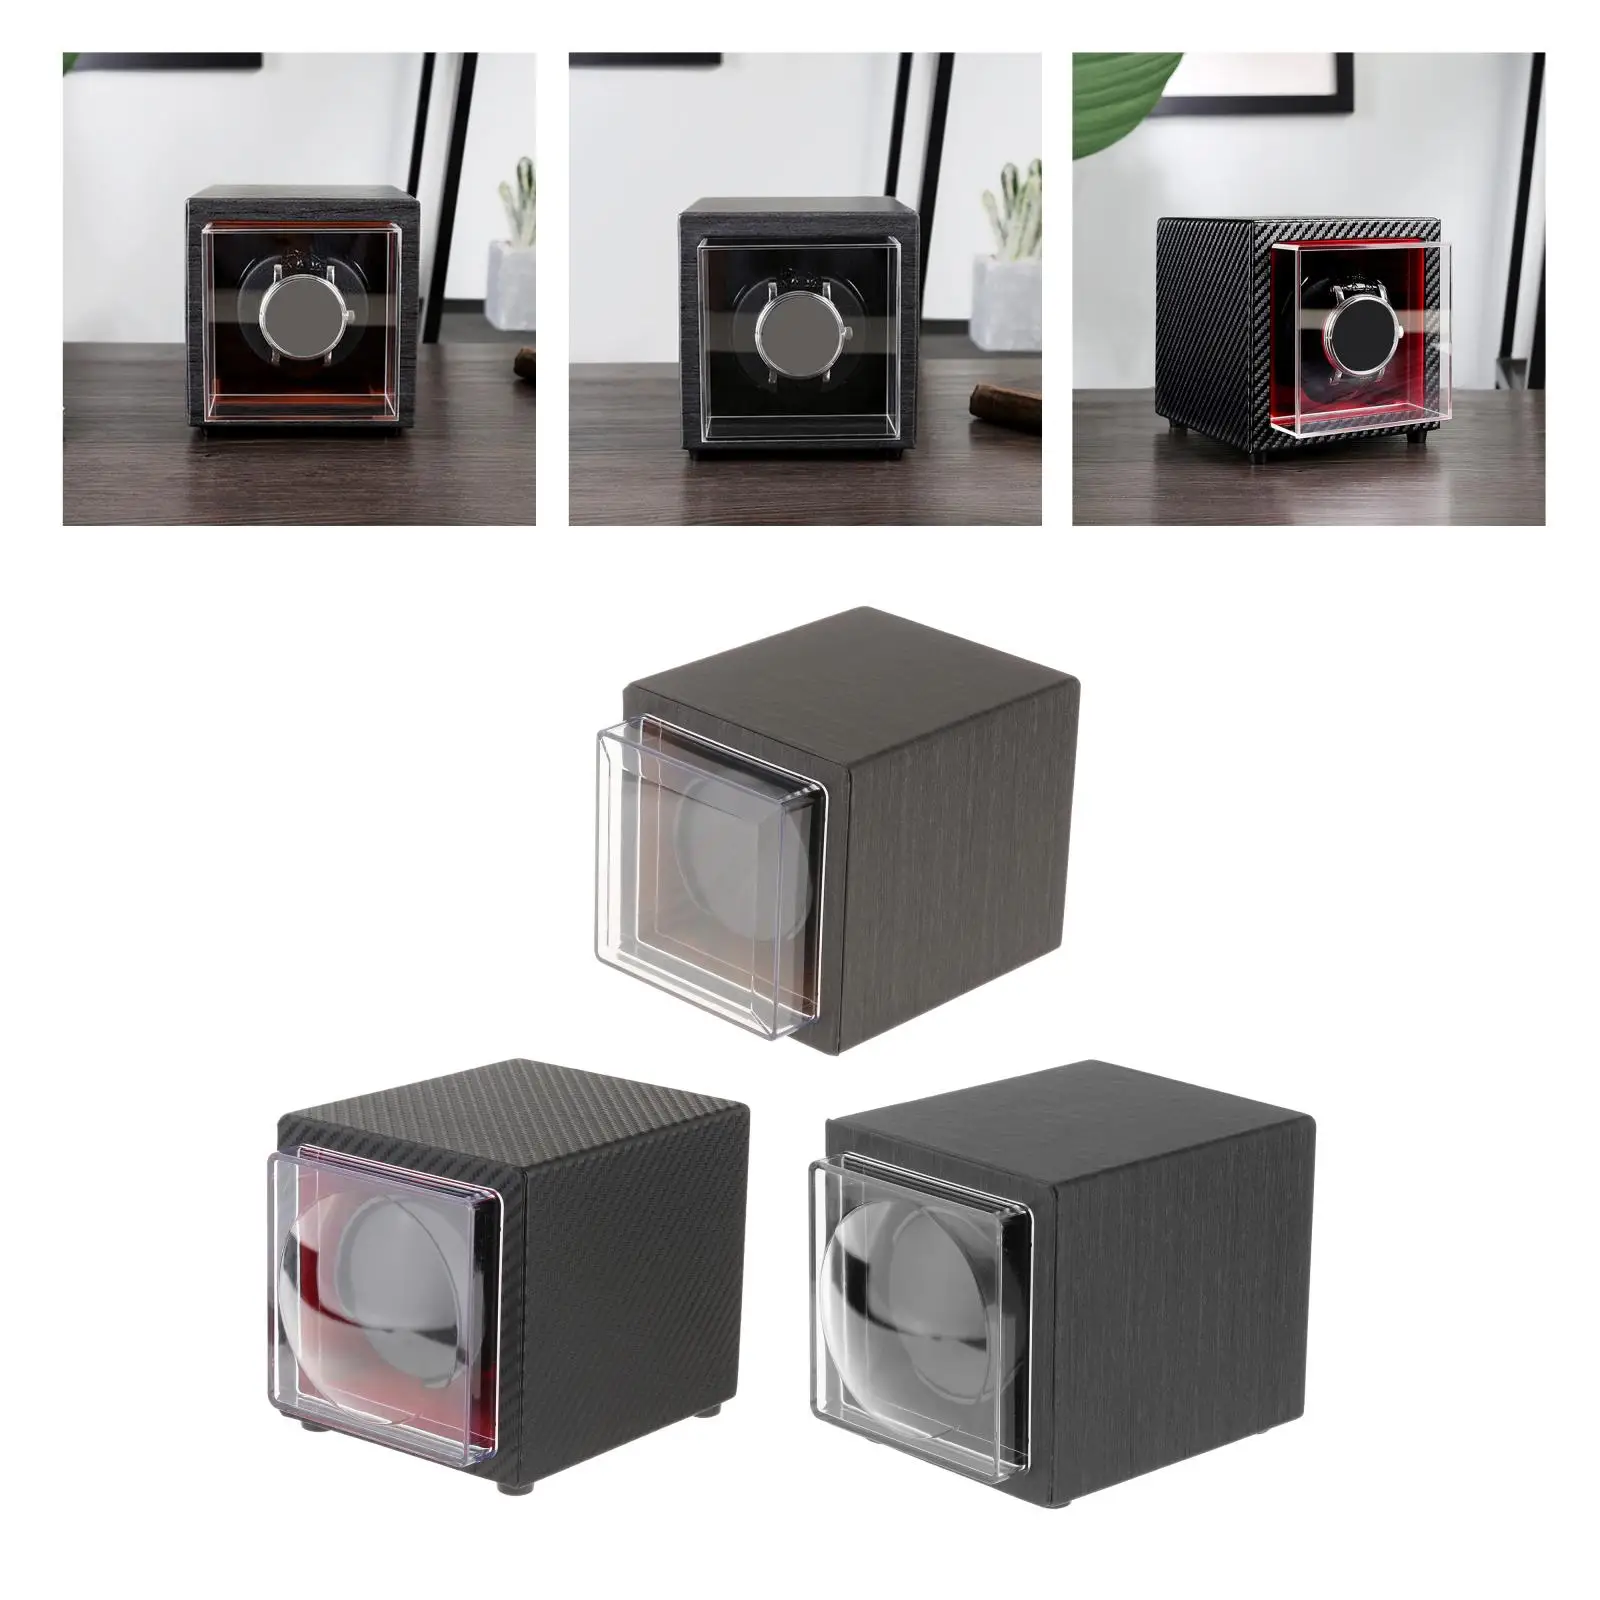 Automatic Watch Winder Watches Storage Collector Winder Box Clock Accessories Battery Powered or AC Adapter 5 Rotation Modes